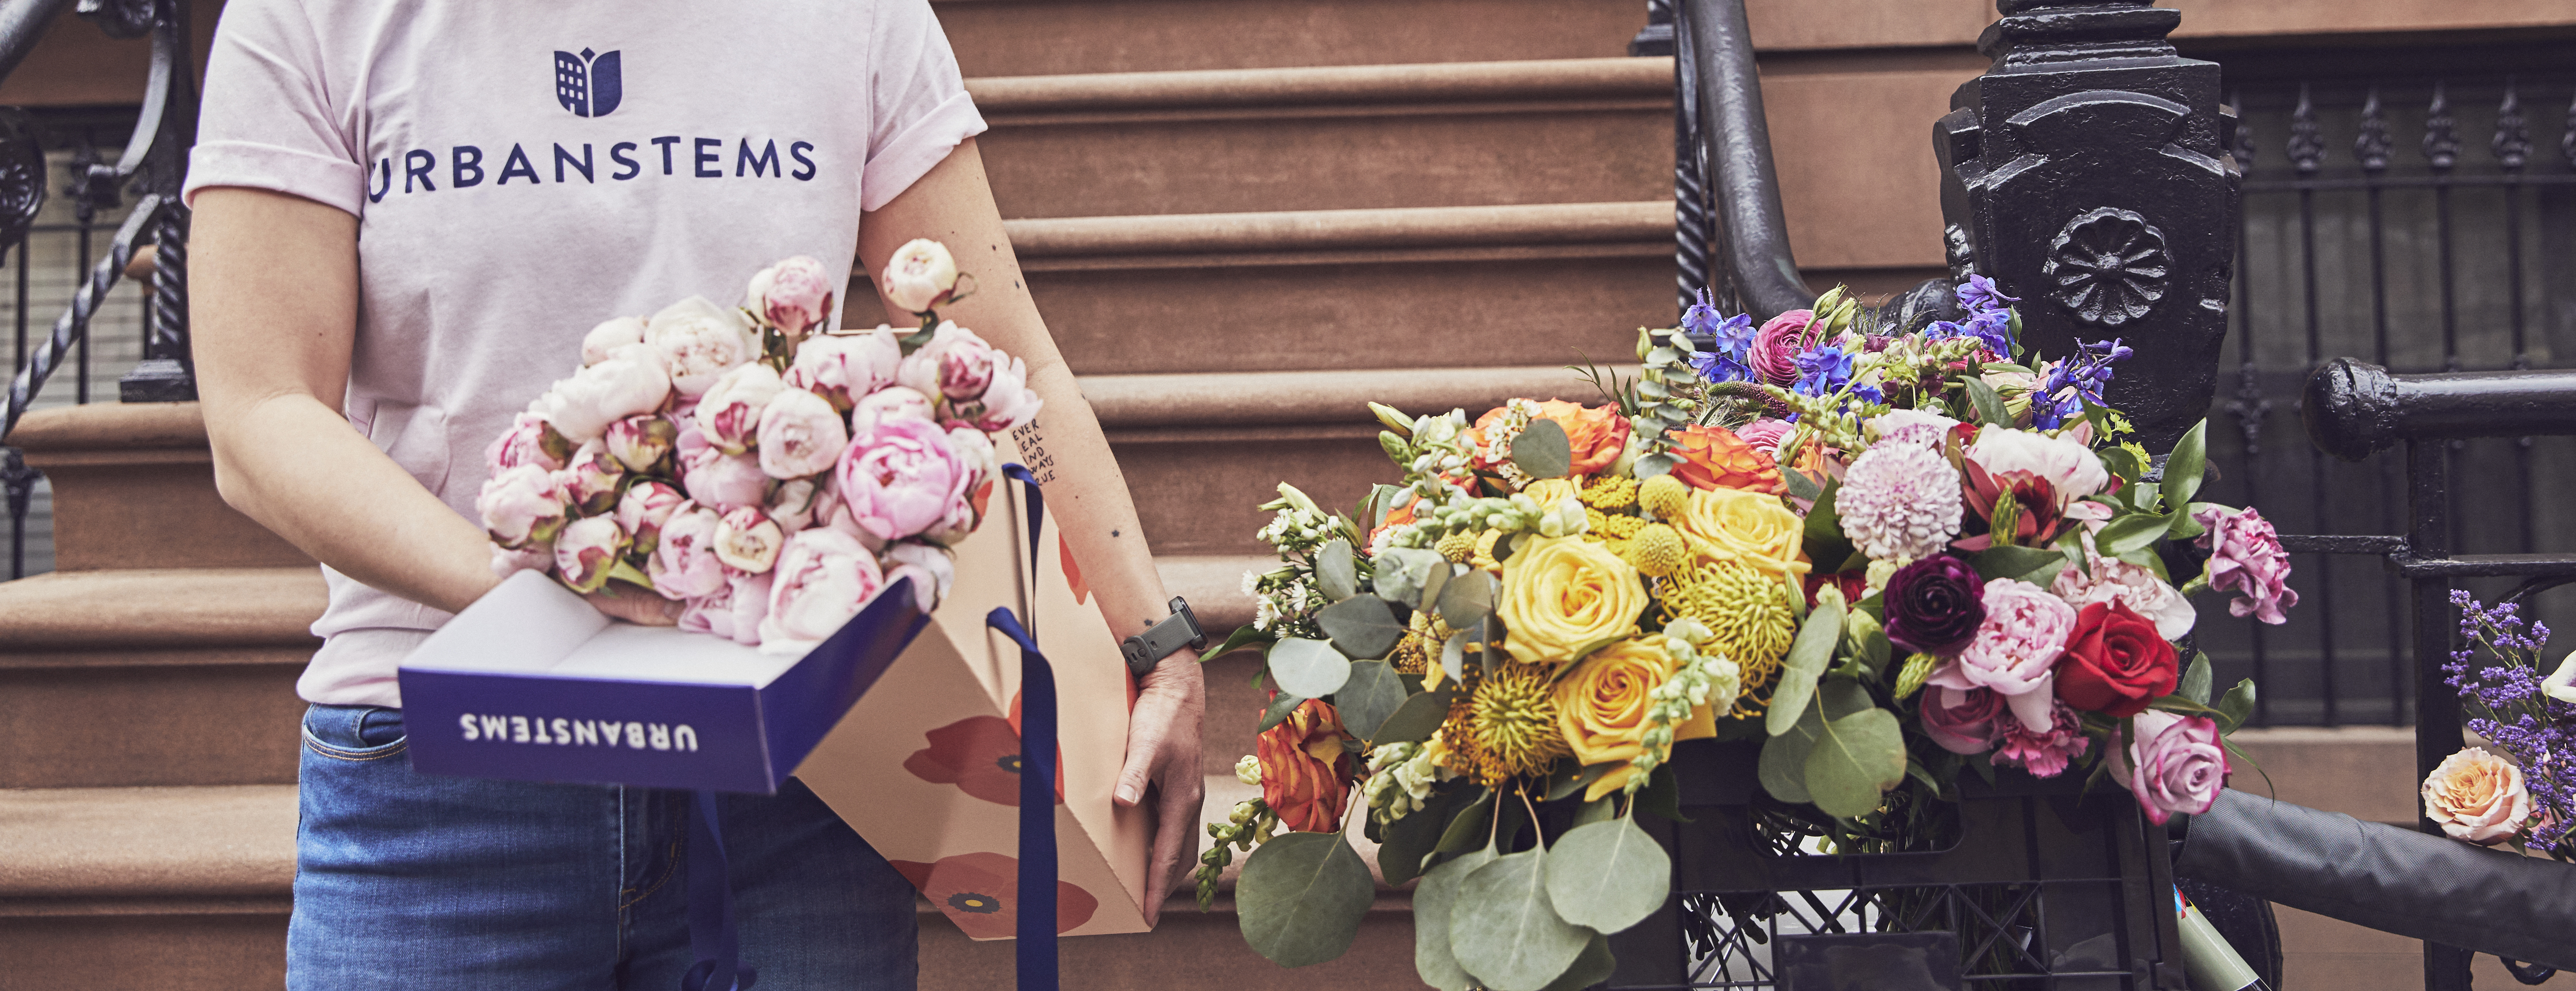 Boxes of flowers being delivered right to the doorstep via UrbanStems same-day delivery